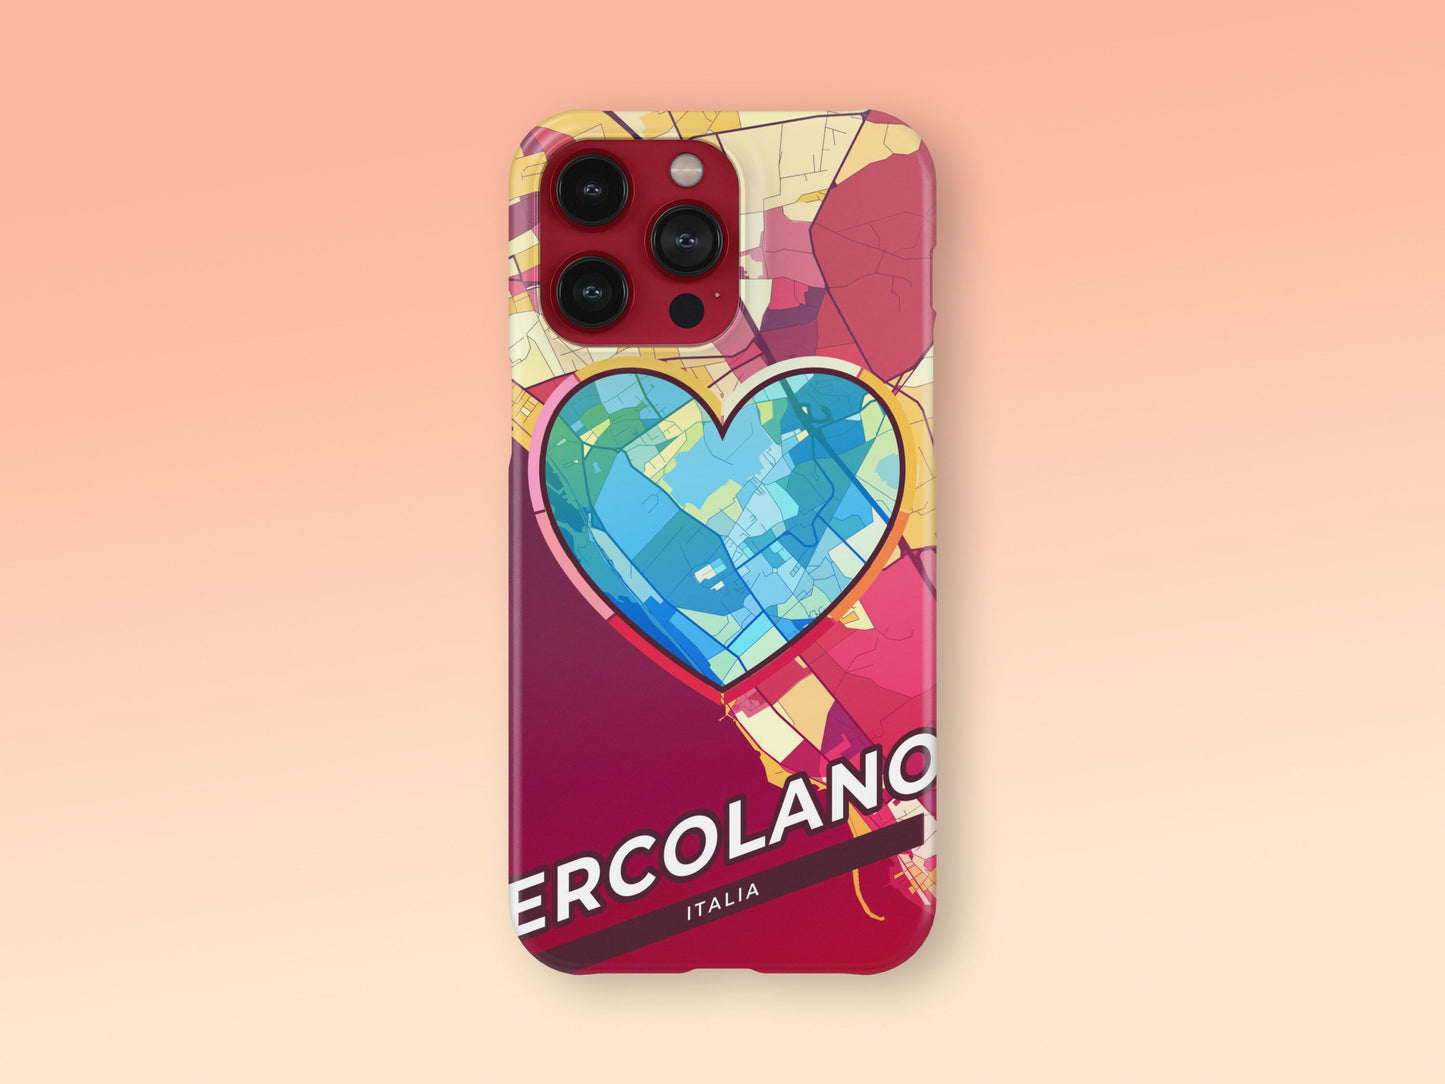 Ercolano Italy slim phone case with colorful icon. Birthday, wedding or housewarming gift. Couple match cases. 2